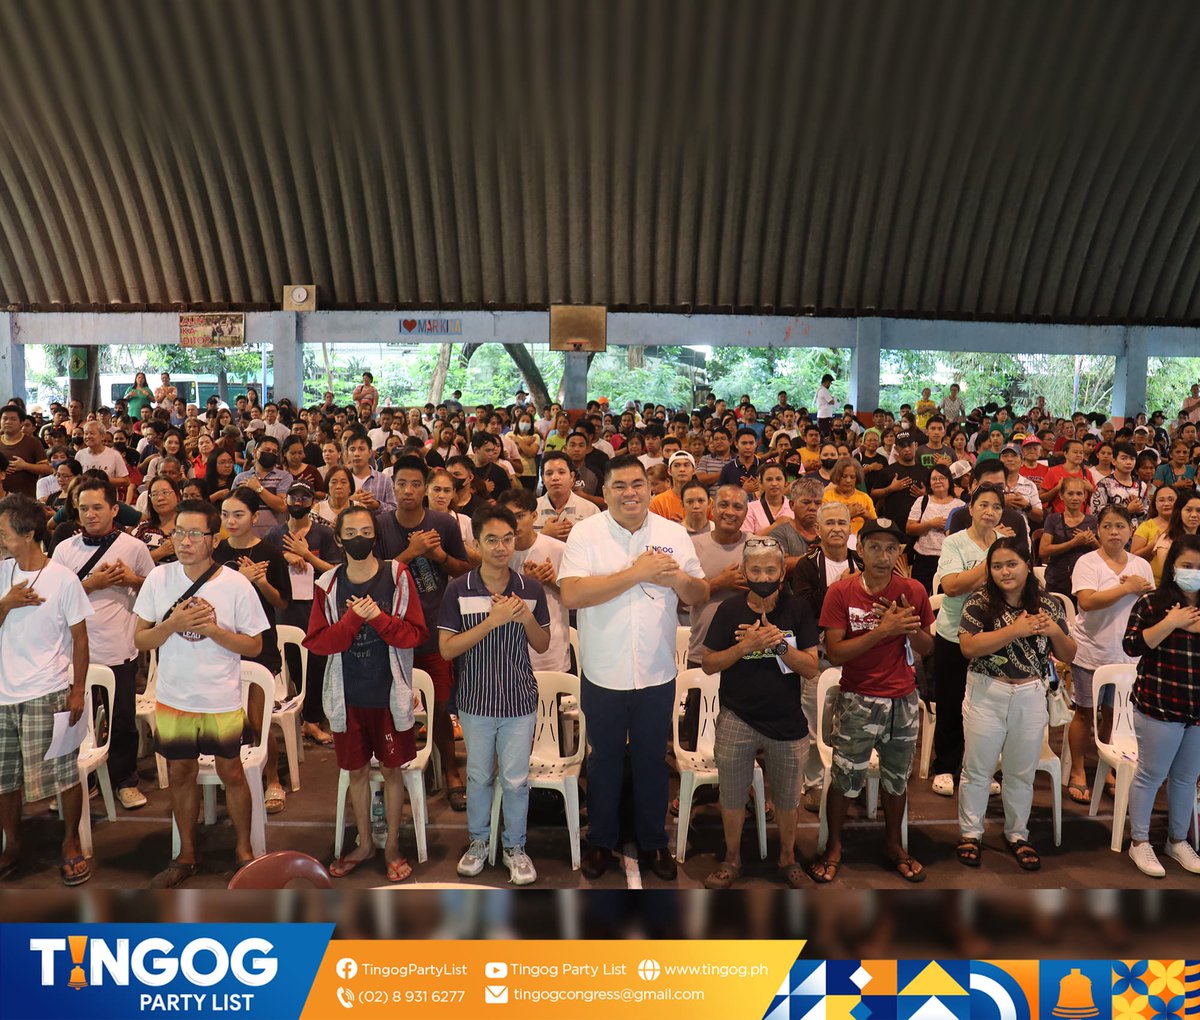 For the purpose of providing financial support under the AICS program of the DSWD, 1,600 individuals were gratefully given 3,000 pesos off-site. 

#TingogPartylist
#SpeakerMartinRomualdez
#YeddaRomualdez
#JudeAcidre
#AlagangTingog
#19thCongress